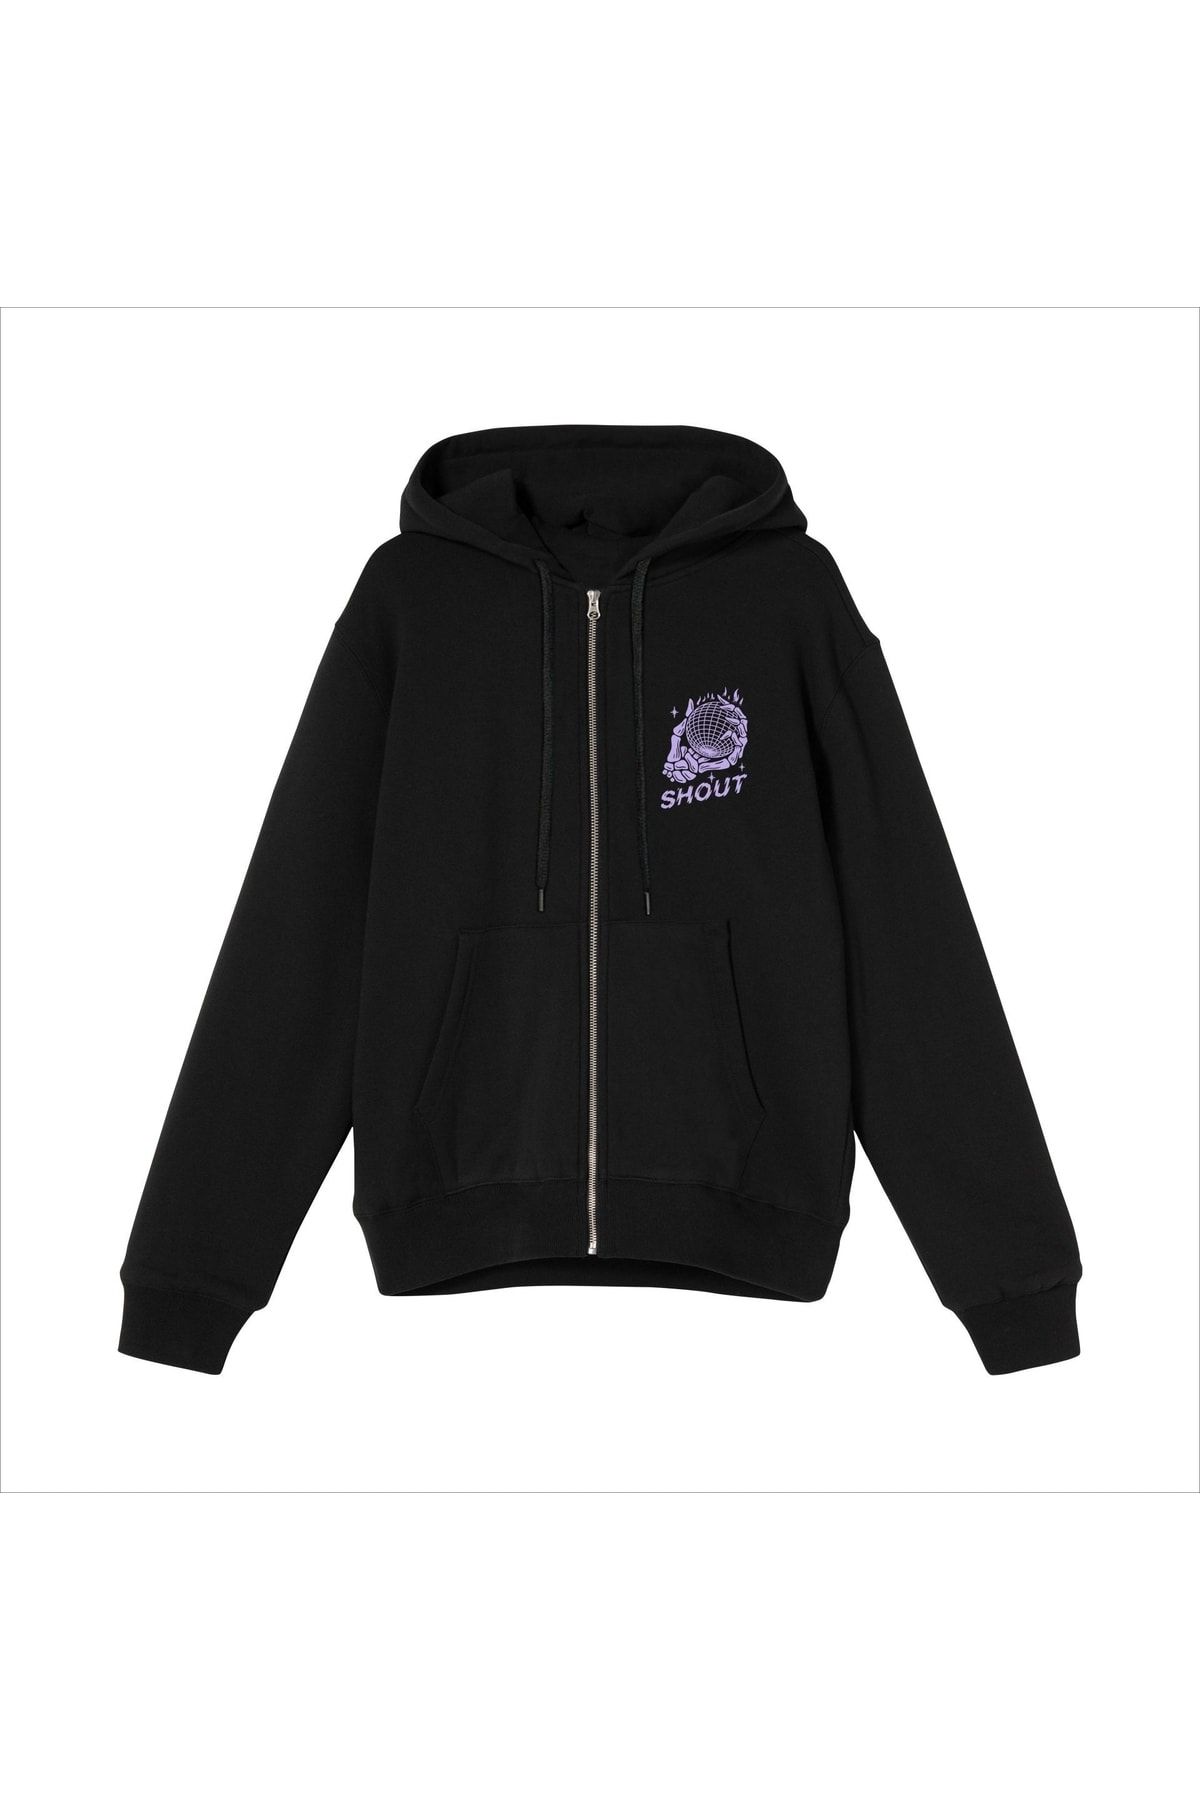 Shout Oversize Beyond The Epic Universe Unisex Zip Up Hoodie